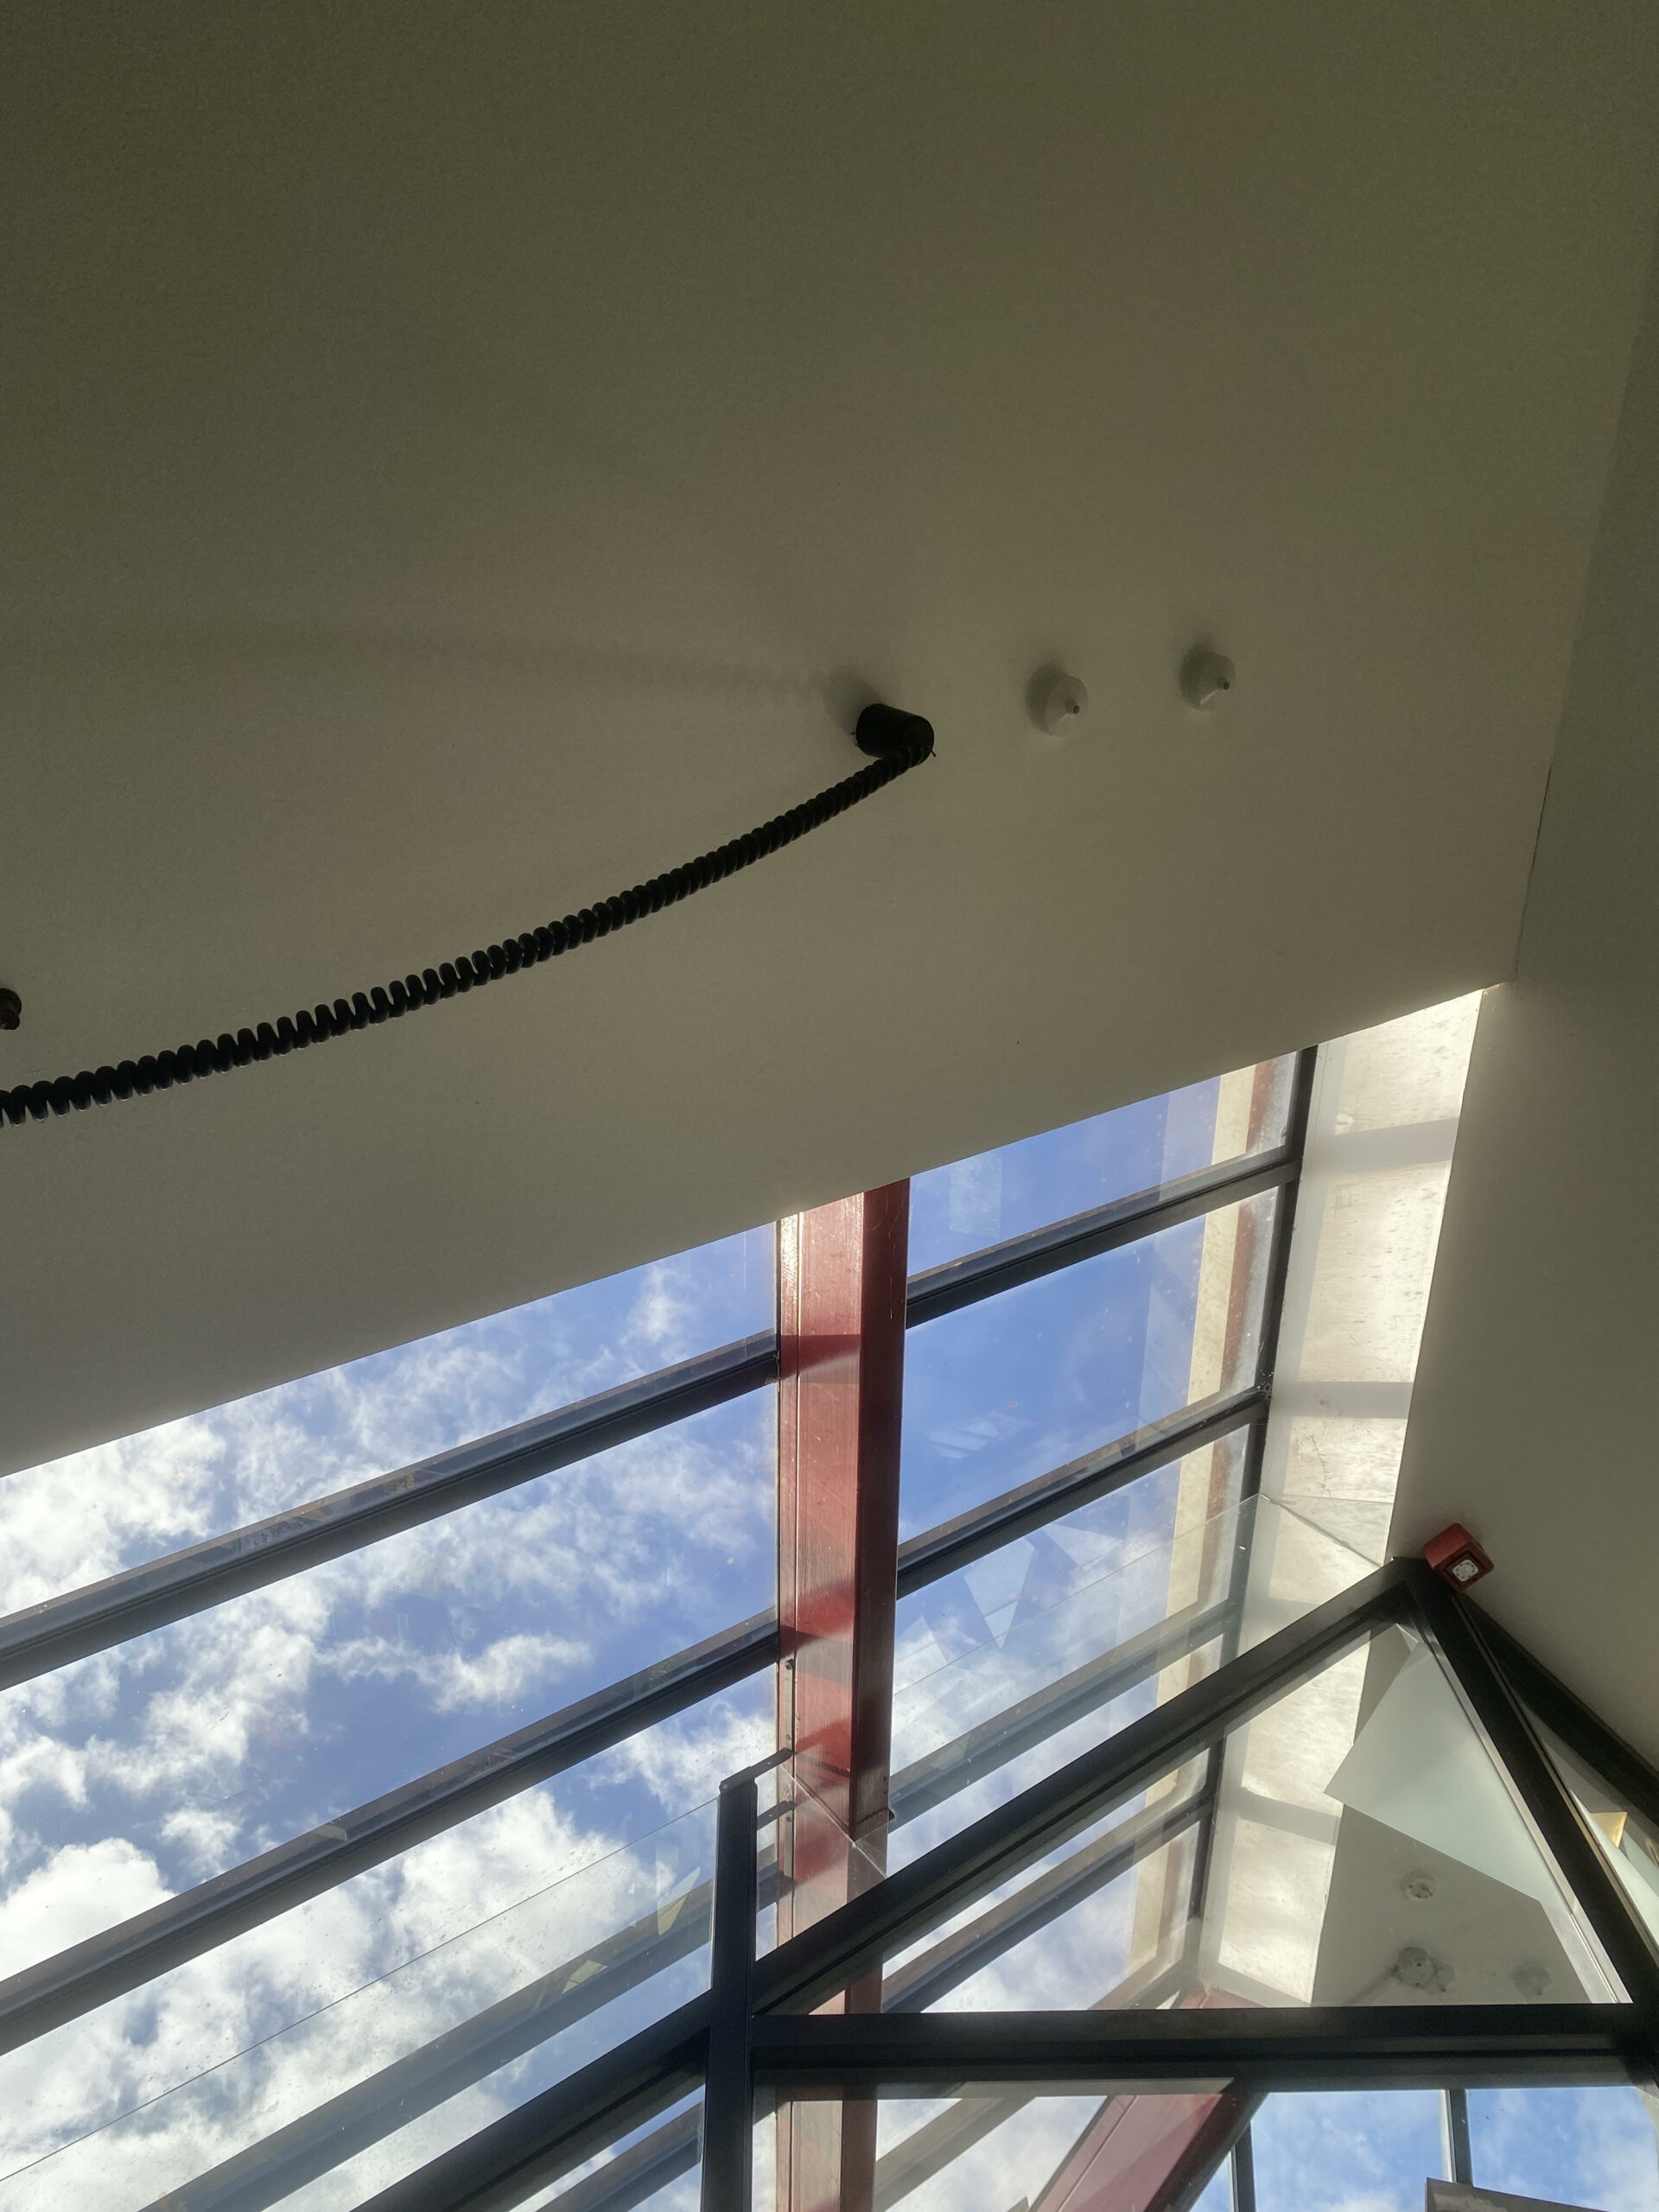 A spiral cord hangs next to a skylight with a red beam across it. Blue sky with fluffy clouds outside.